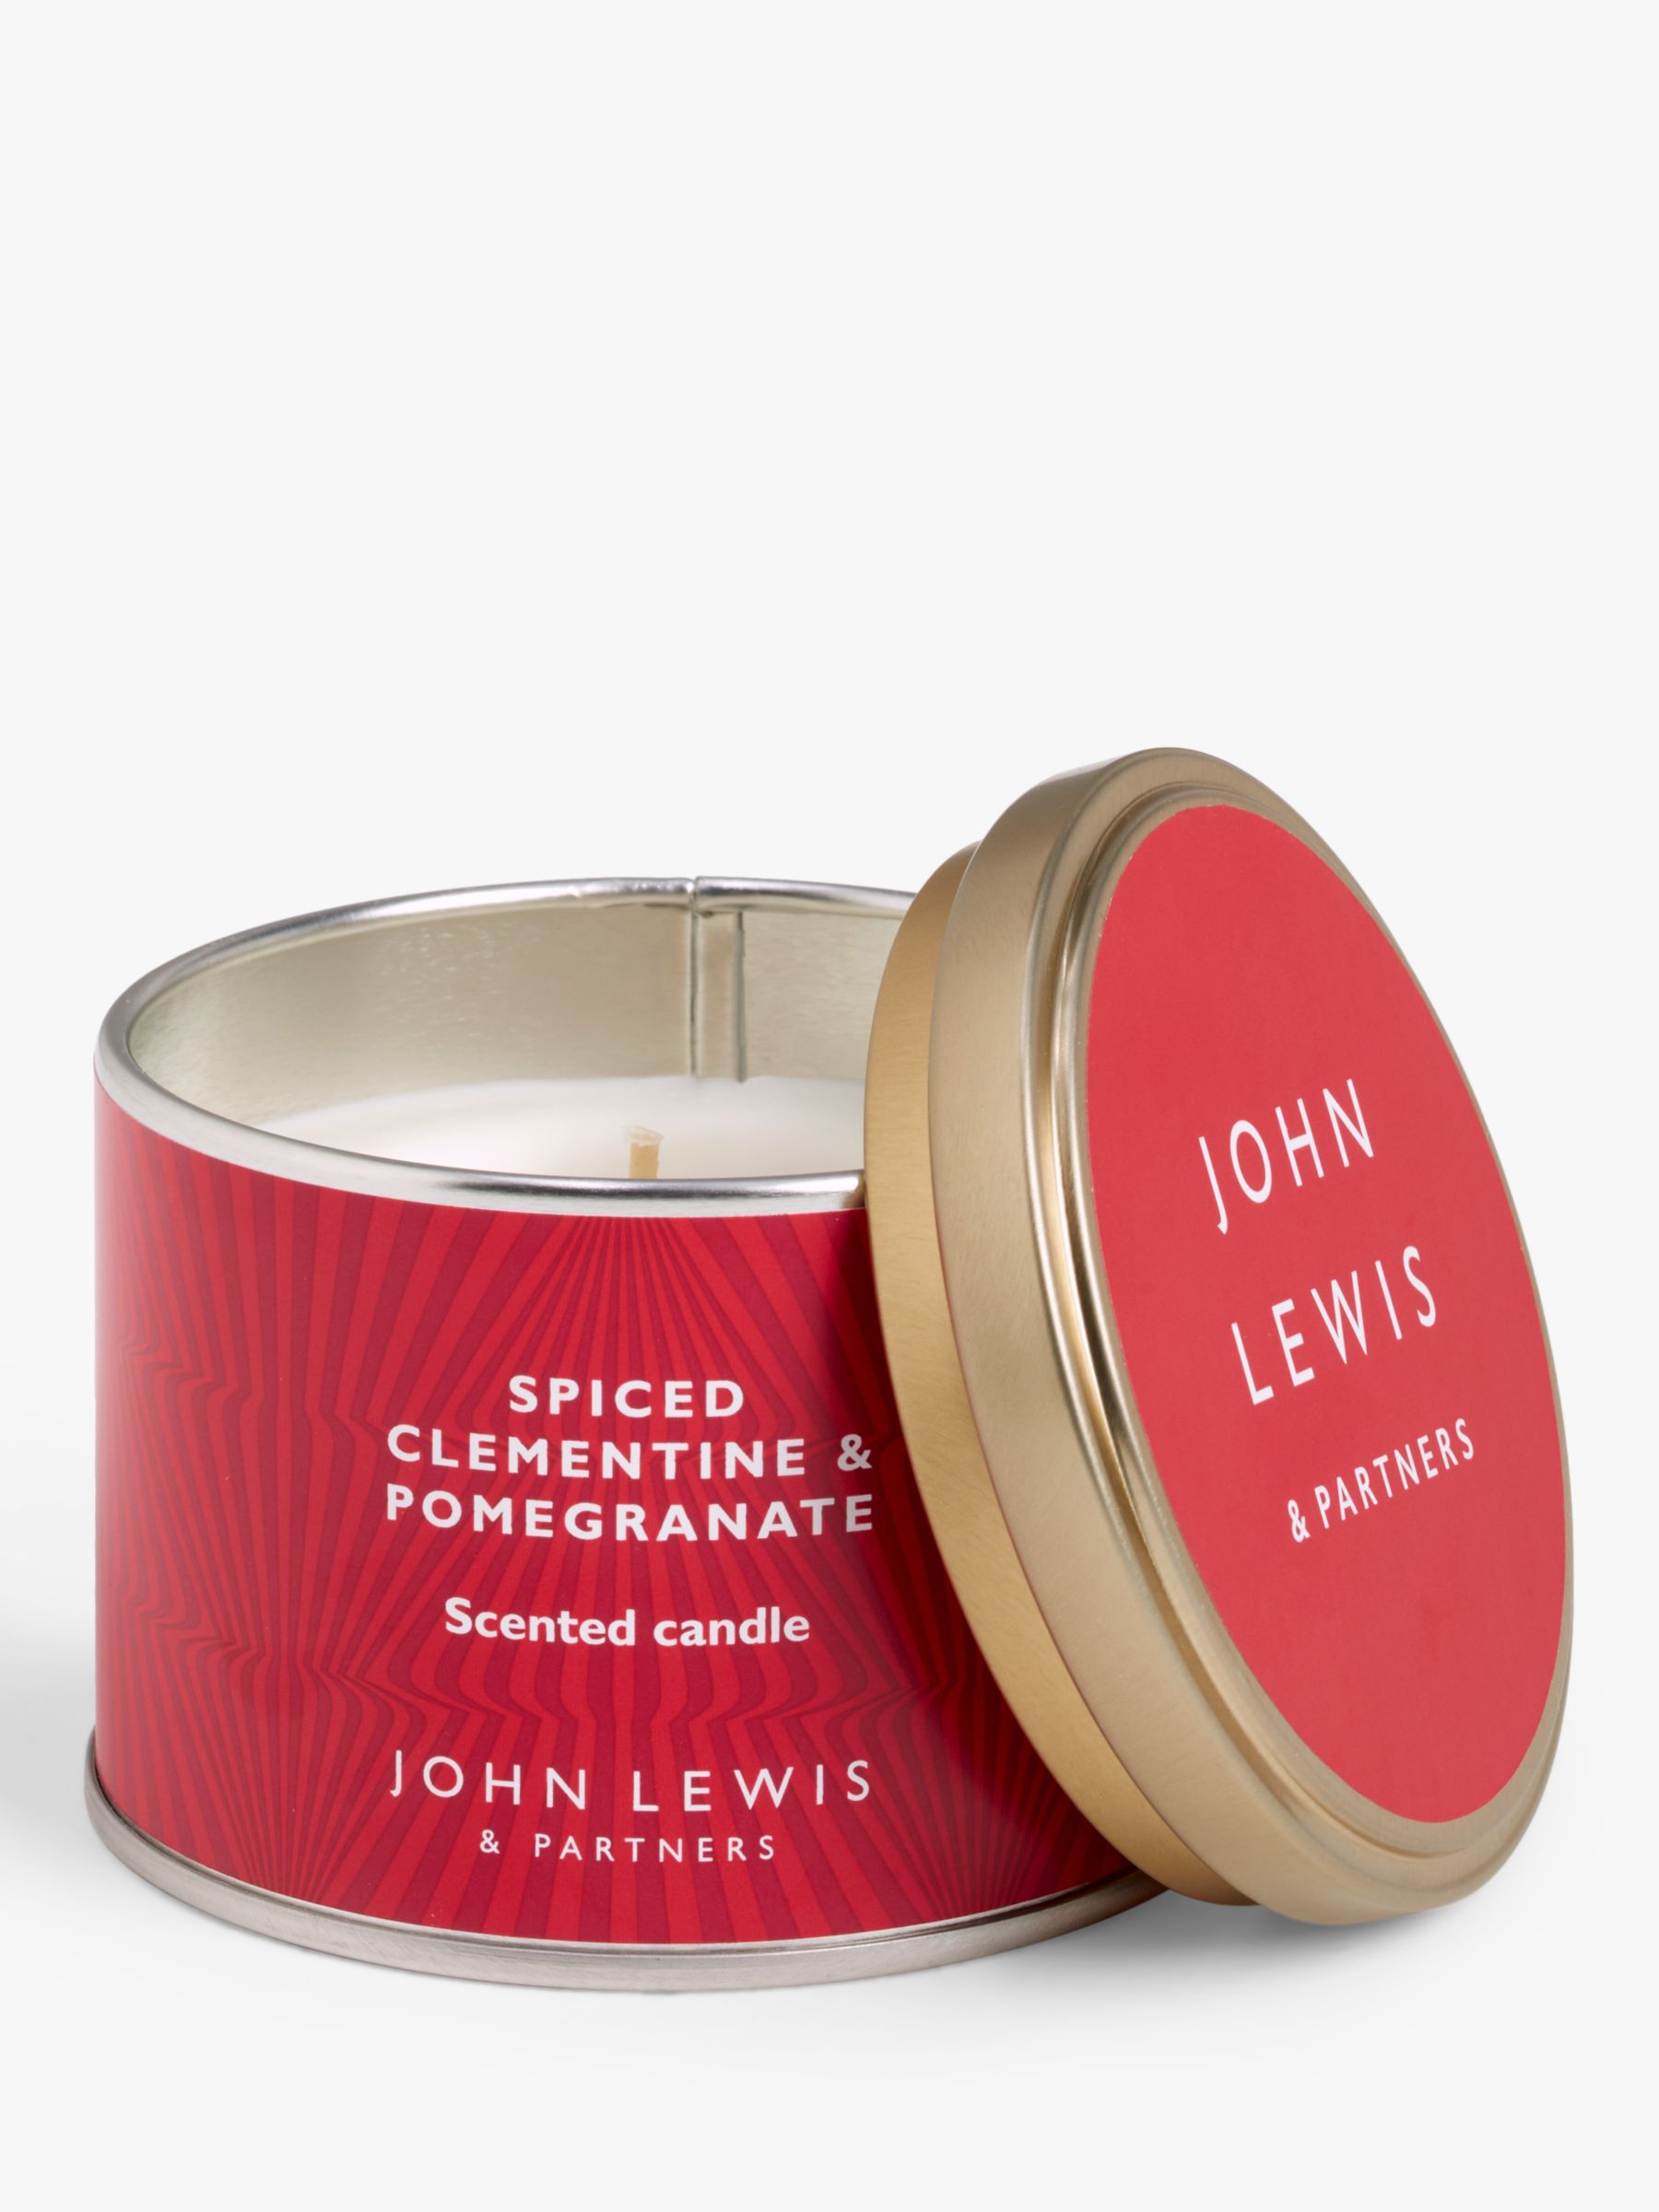 John Lewis Spiced Clementine & Pomegranate Scented Candle Tin, 147g